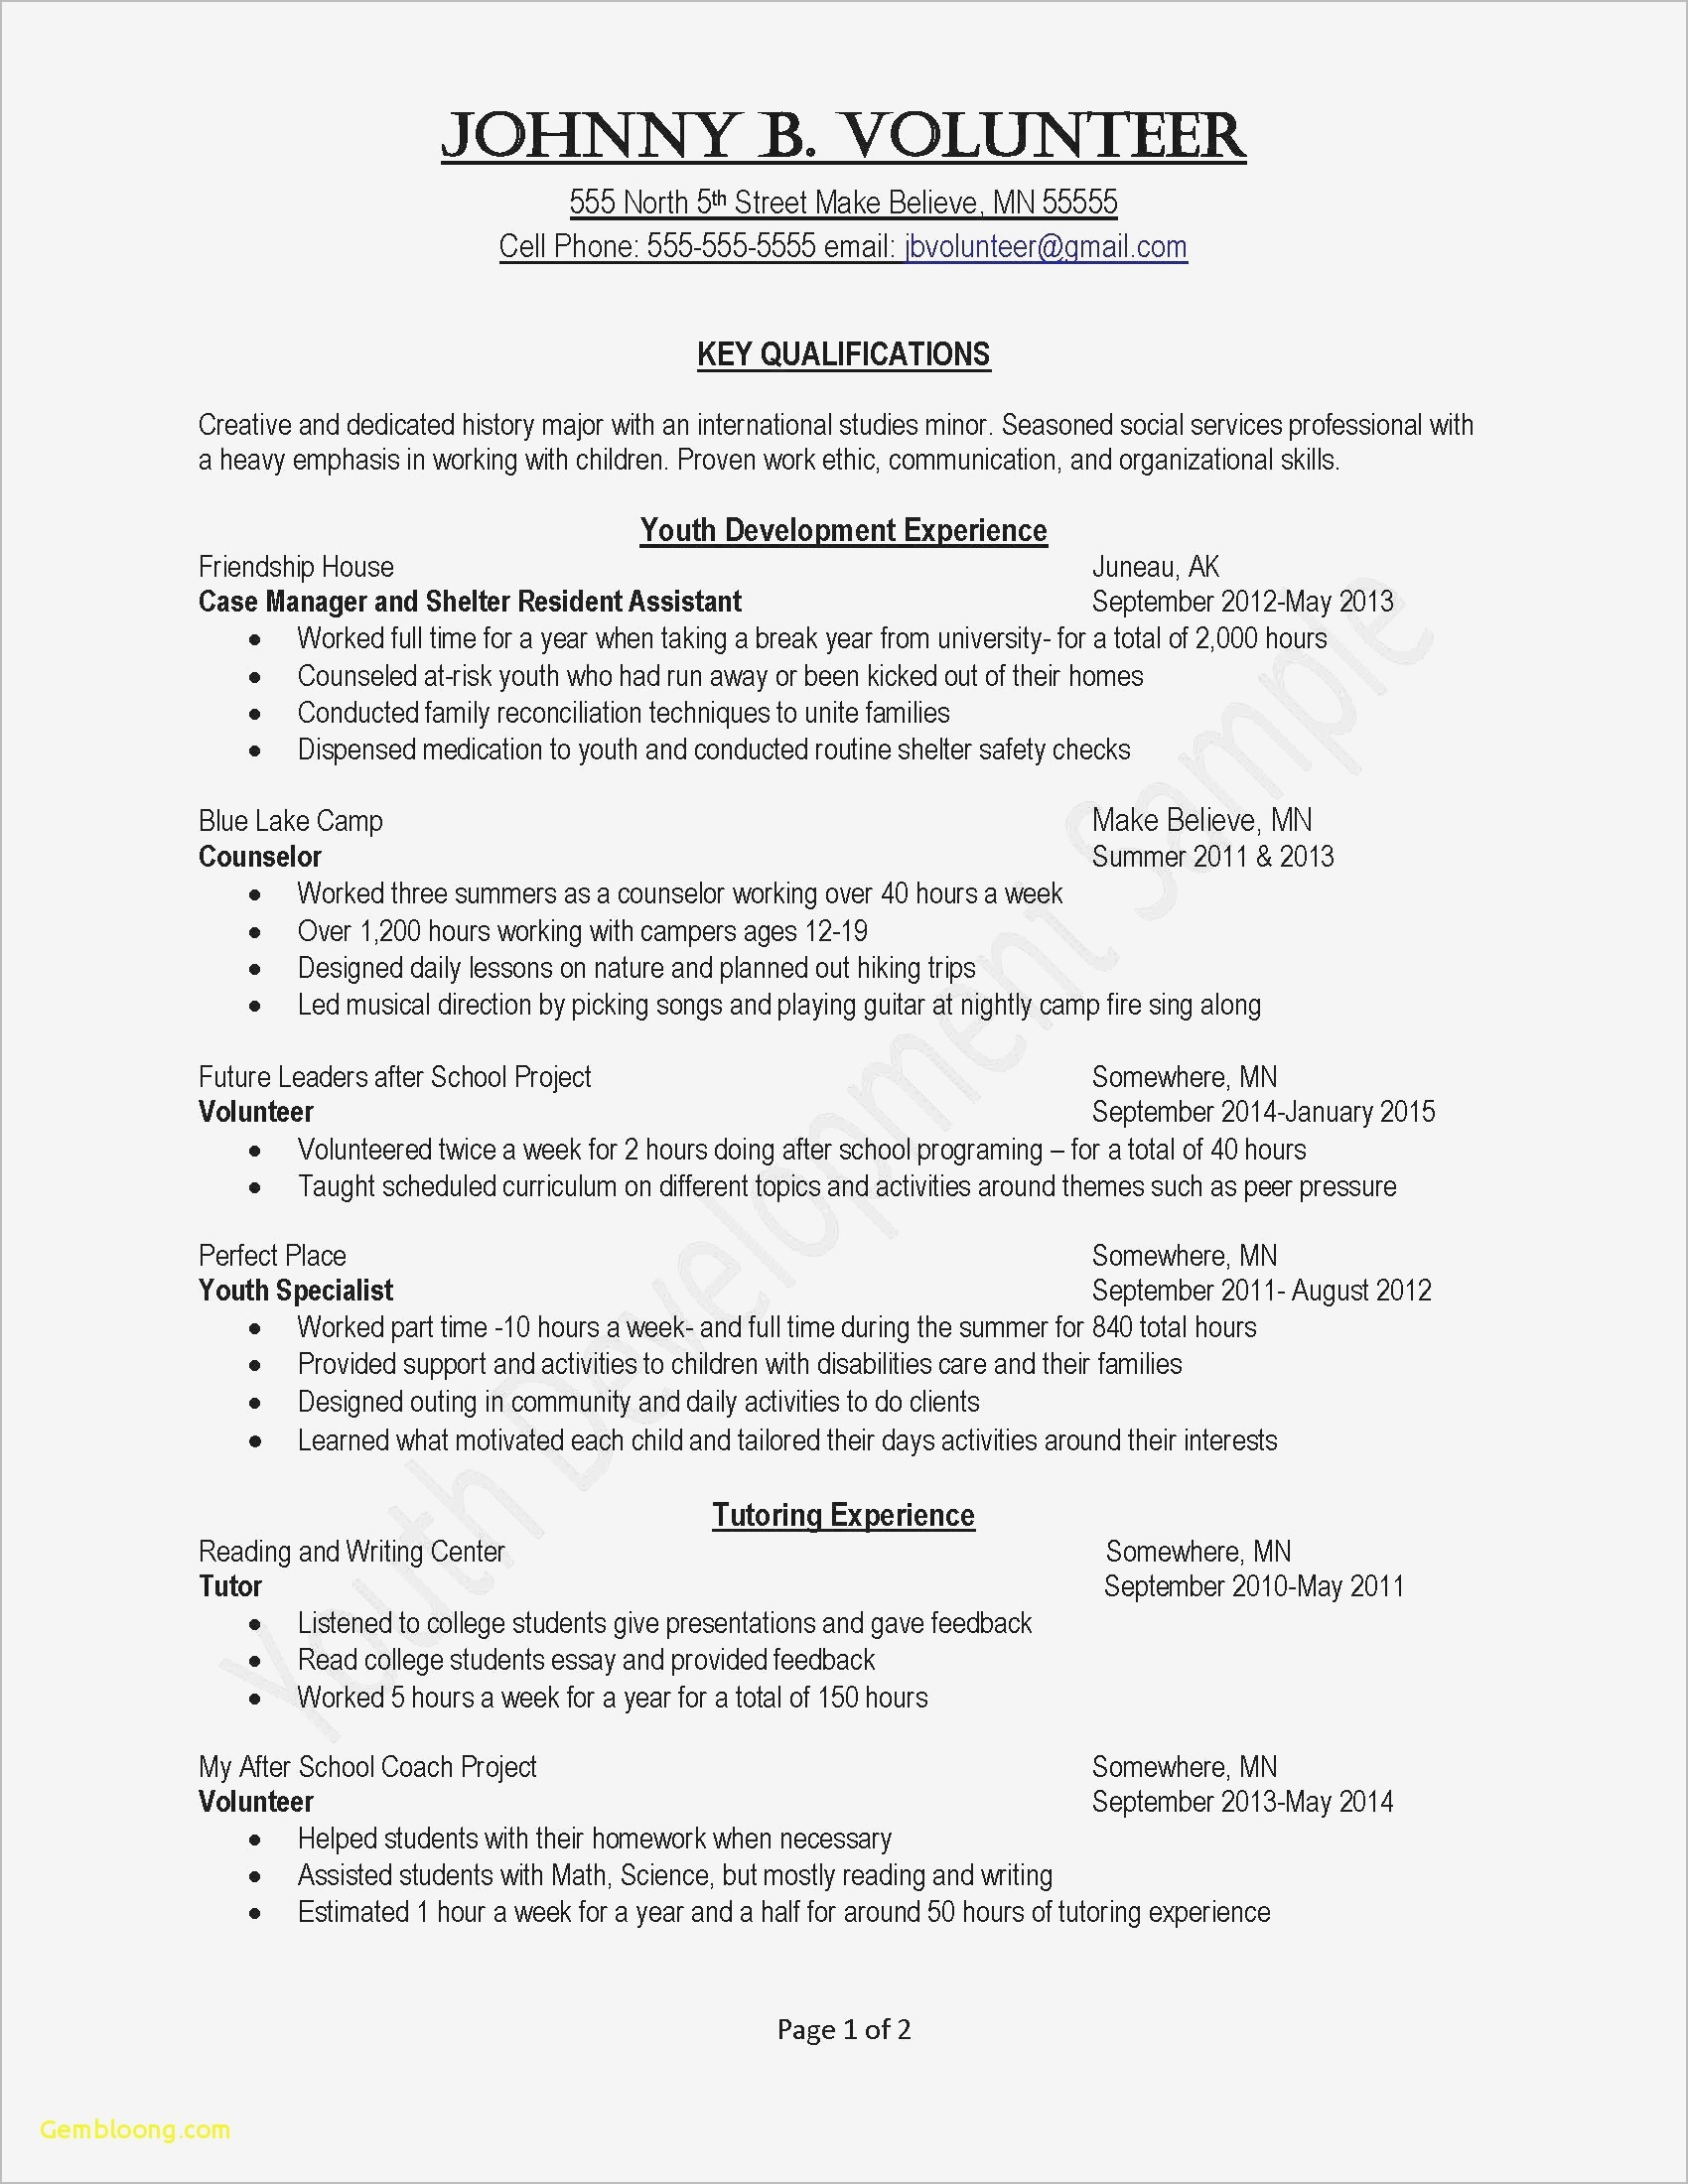 Application Letter Template Word - Job Fer Letter Template Us Copy Od Consultant Cover Letter Fungram